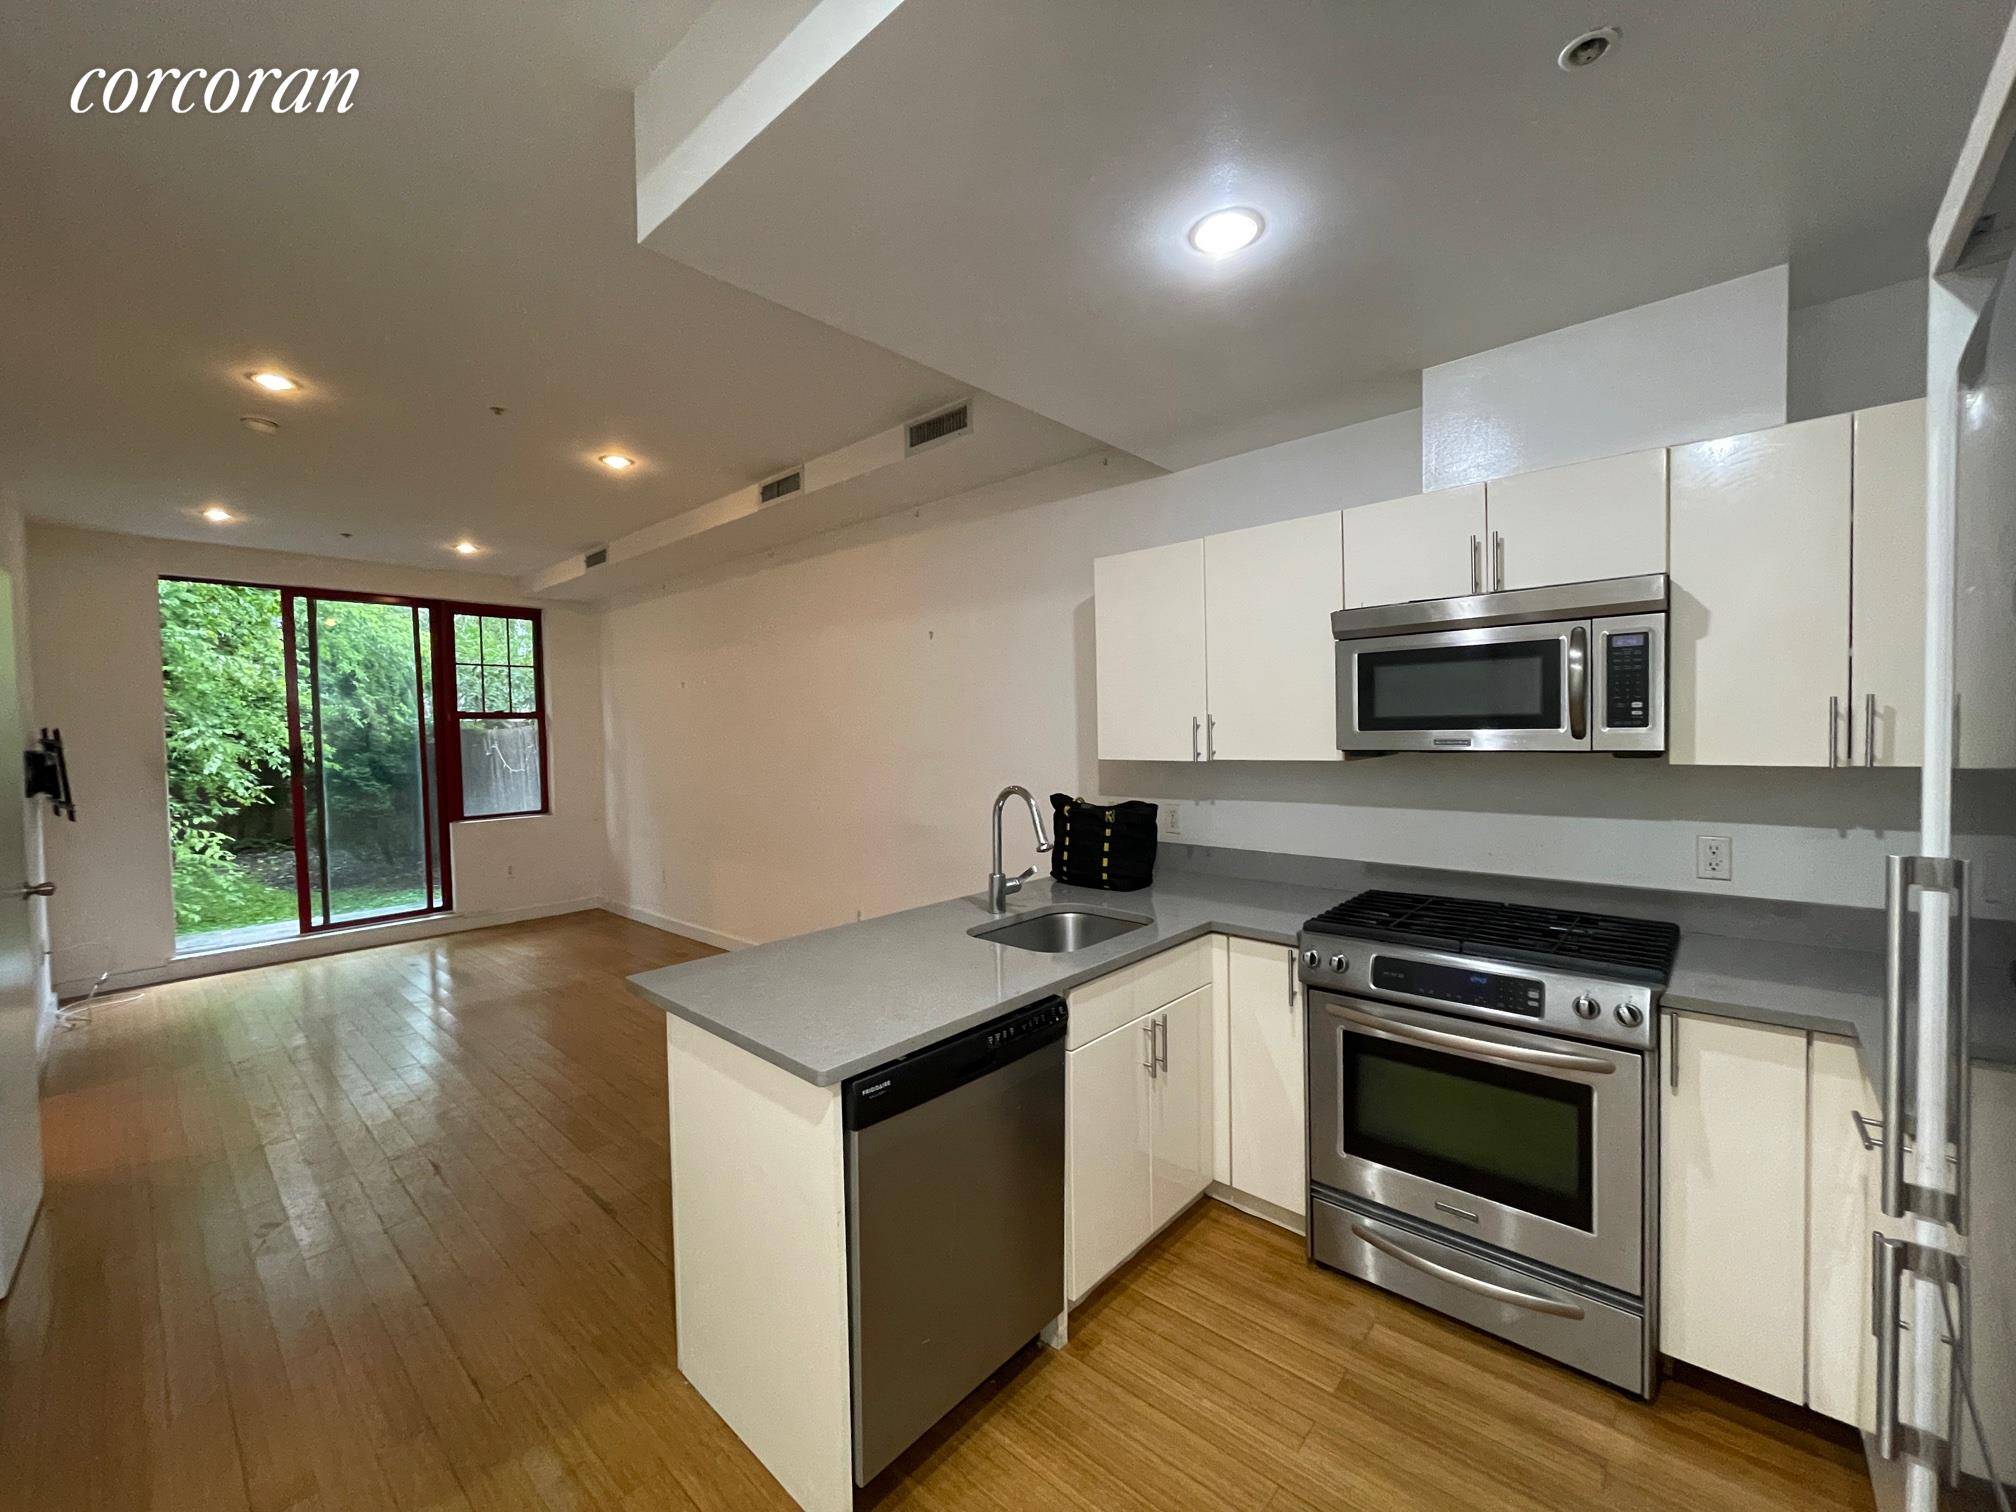 Huge One Bedroom Duplex with Enormous Backyard amp ; Recreation Room This beautiful 1 bedroom 1 and 1 2 bathroom apartment could easily function as a 2 bedroom with home ...